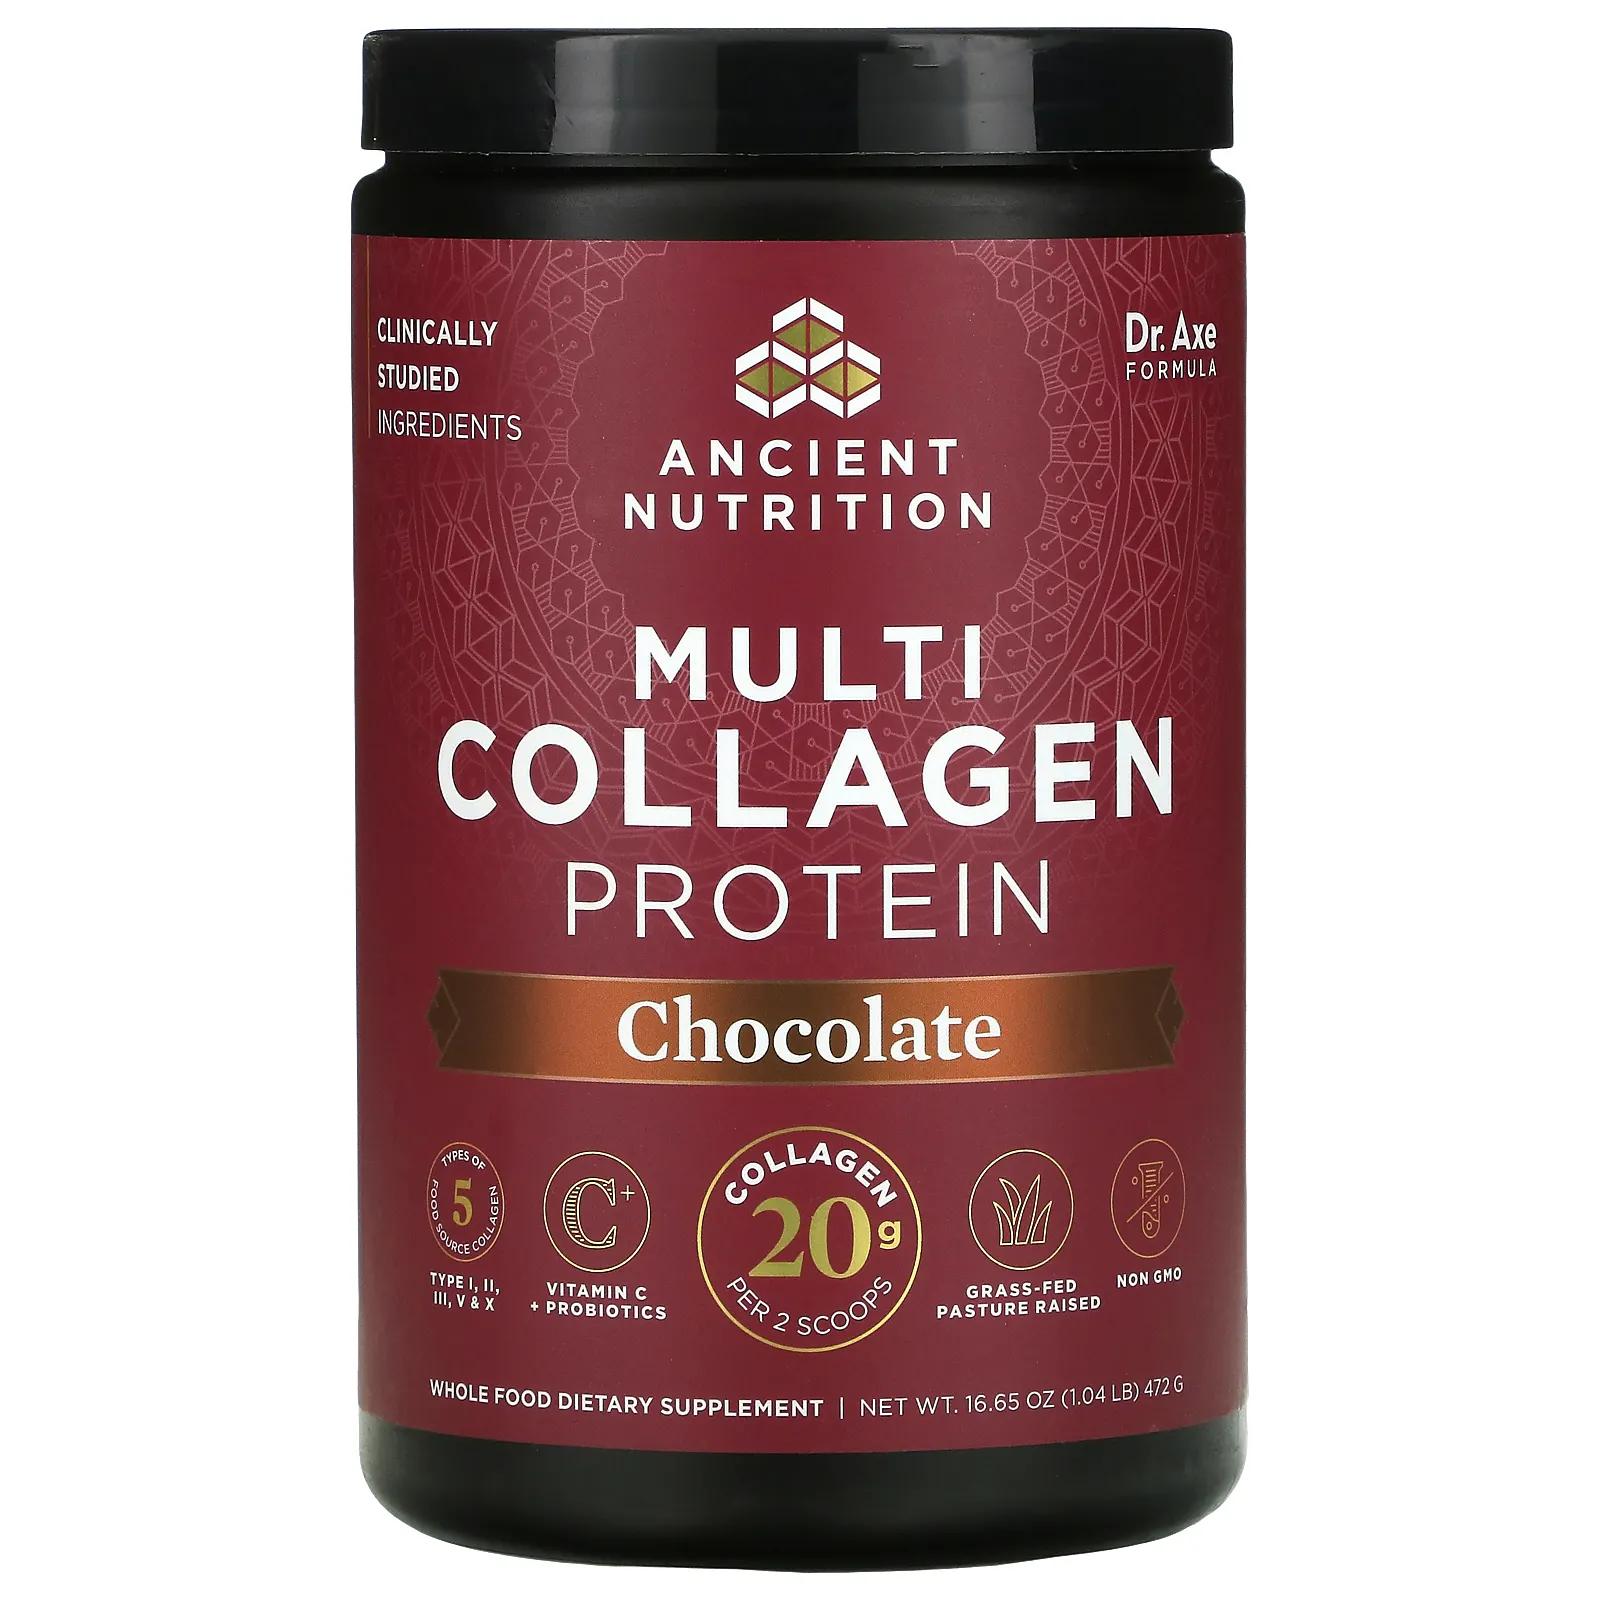 Dr. Axe / Ancient Nutrition Multi Collagen Protein Chocolate 18.5 oz (525 g) dr axe ancient nutrition bone broth protein salted caramel 1 18 lb 540 g